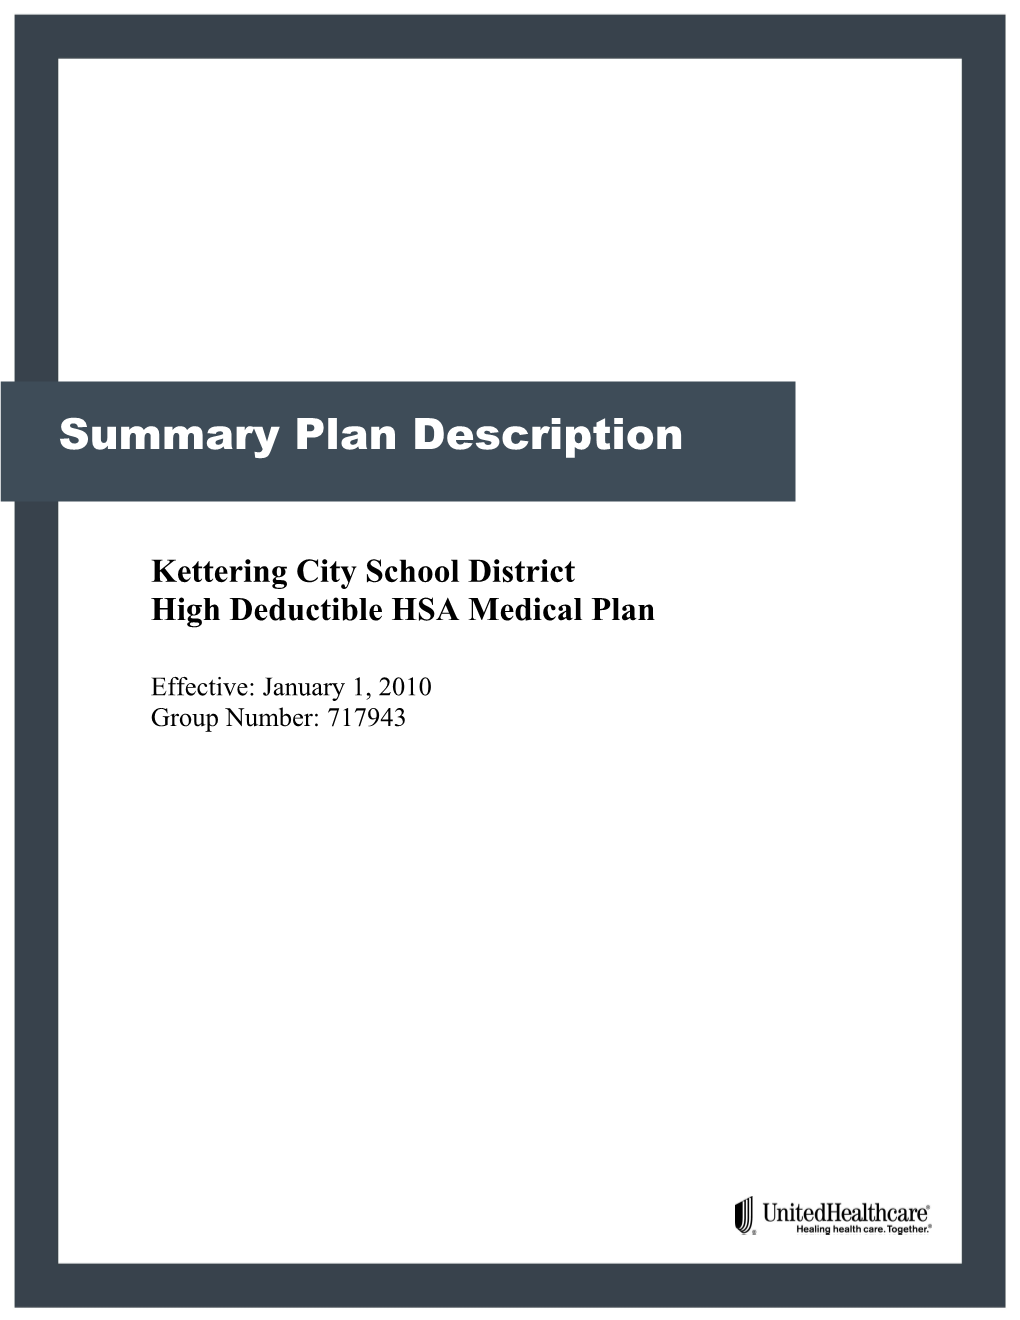 Kettering City School District High Deductible HSA Medical Plan